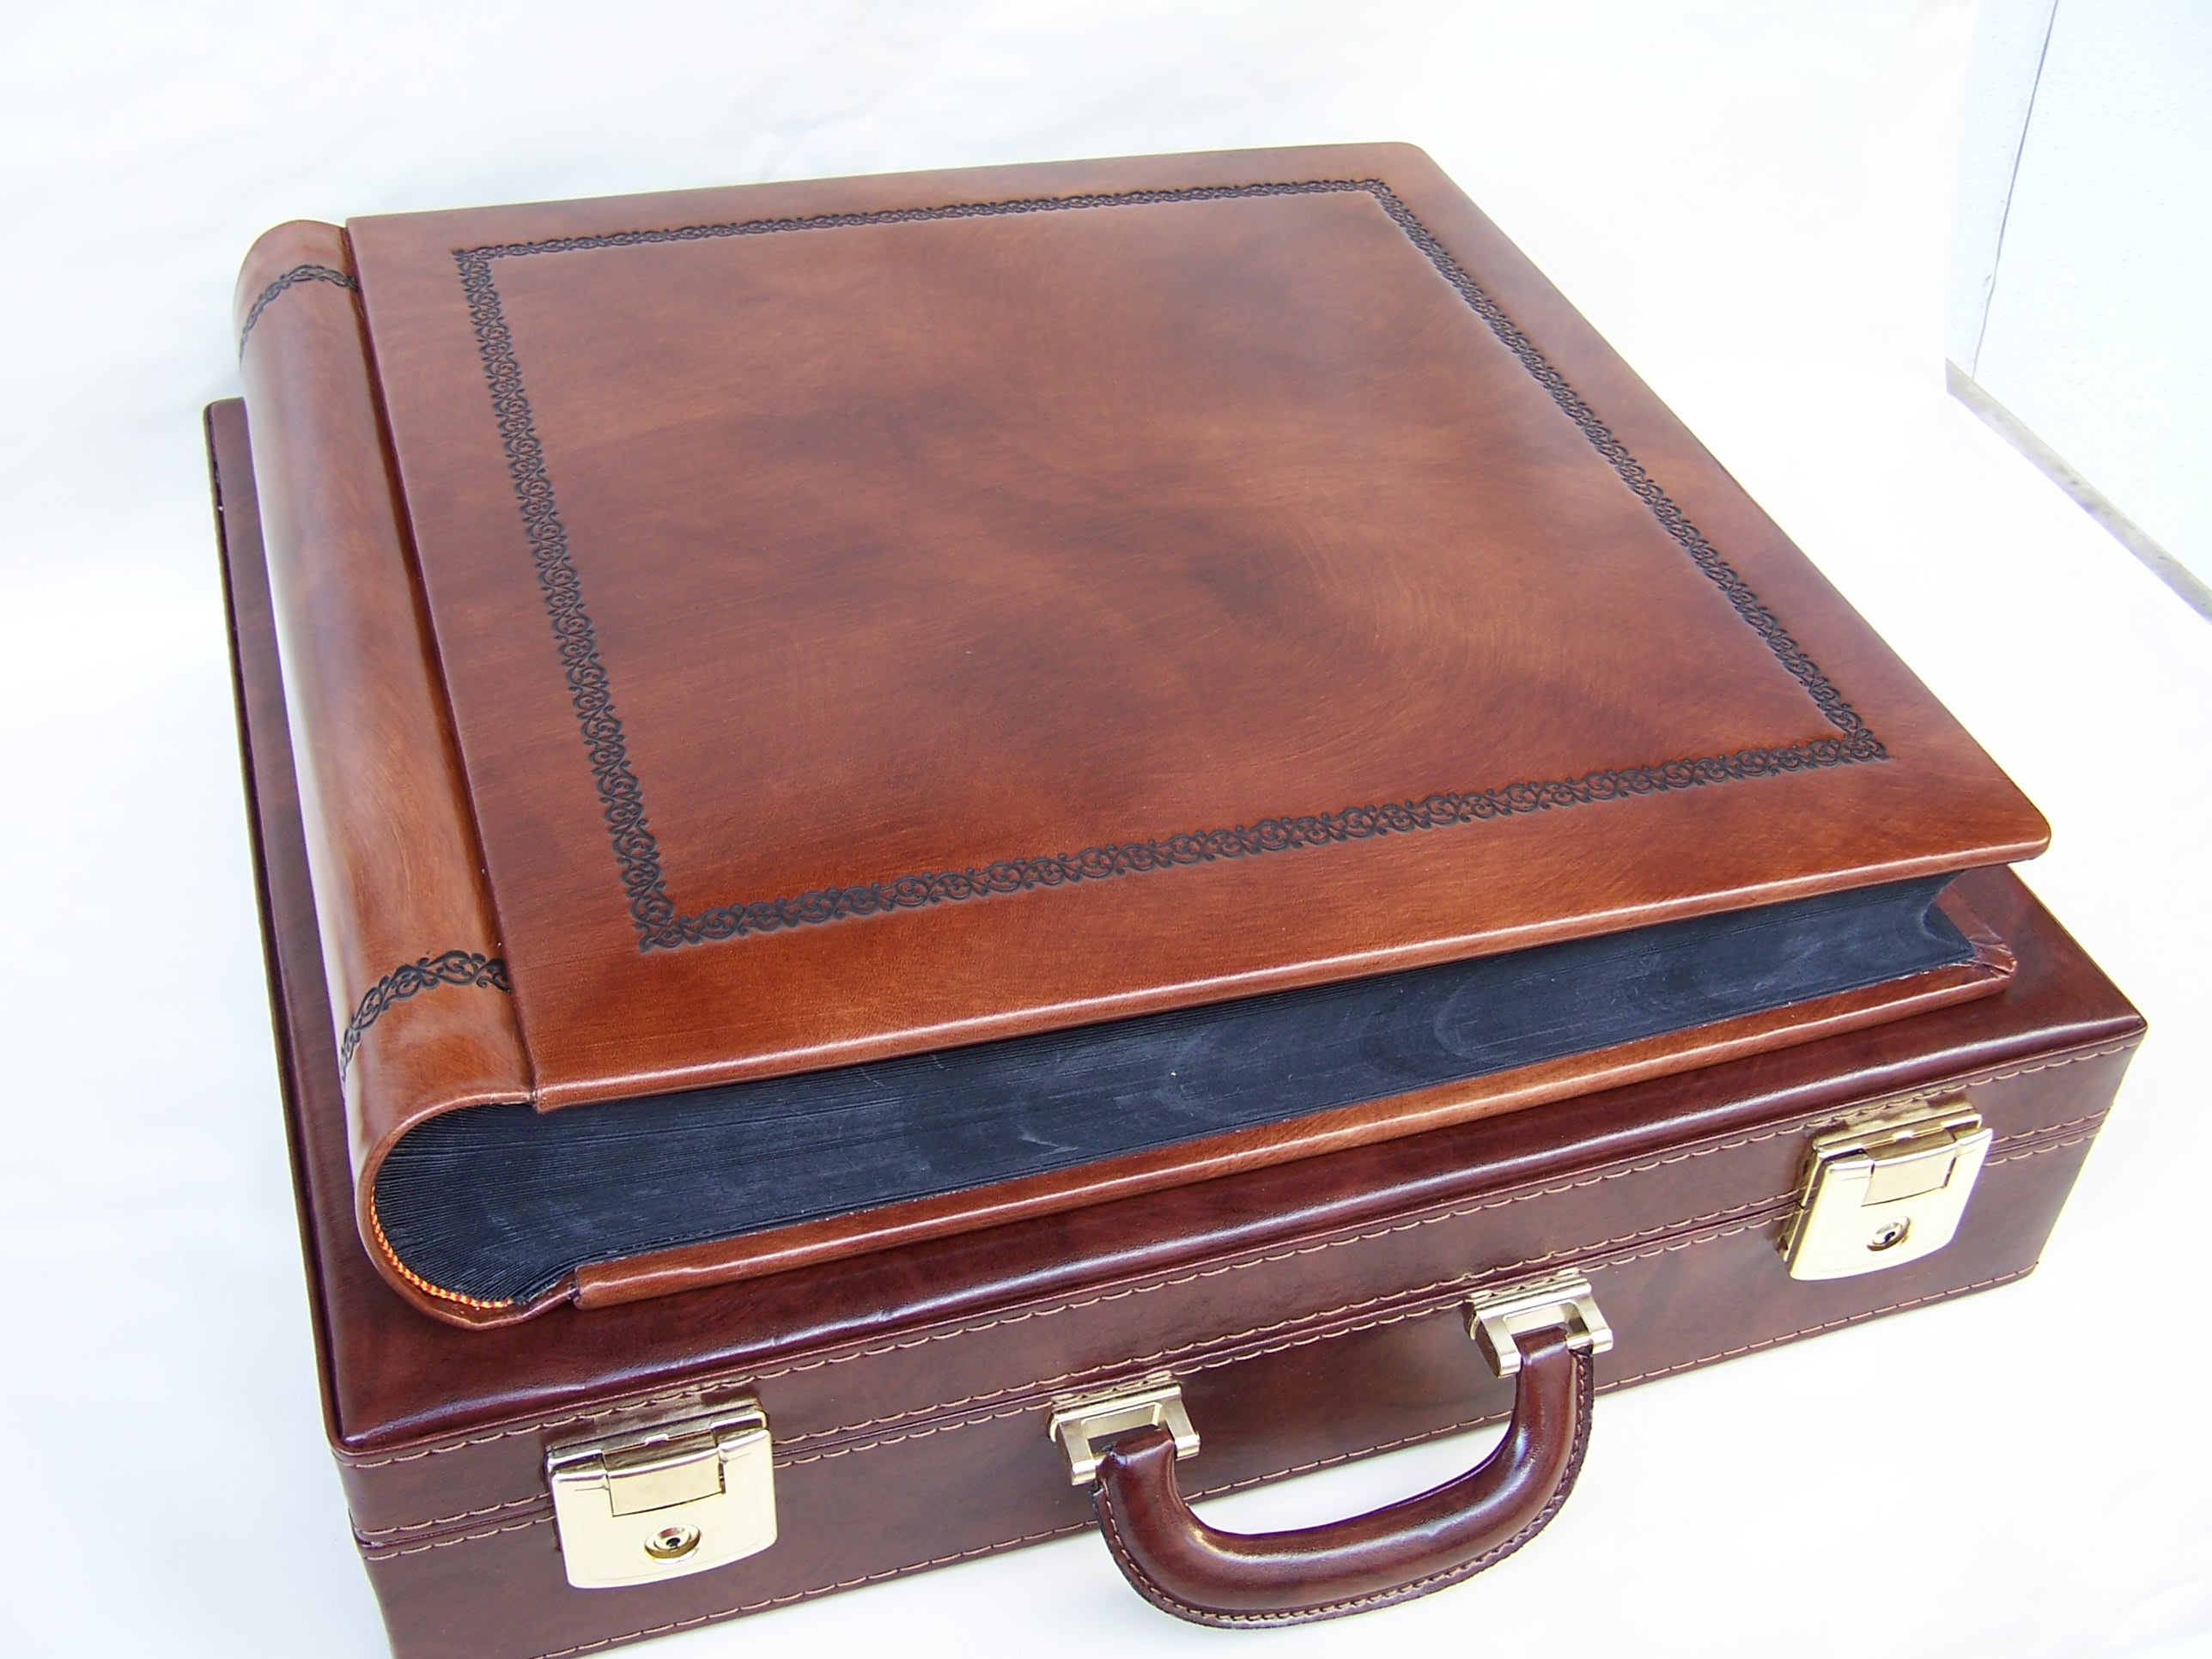 Leather photo album - Made in Italy